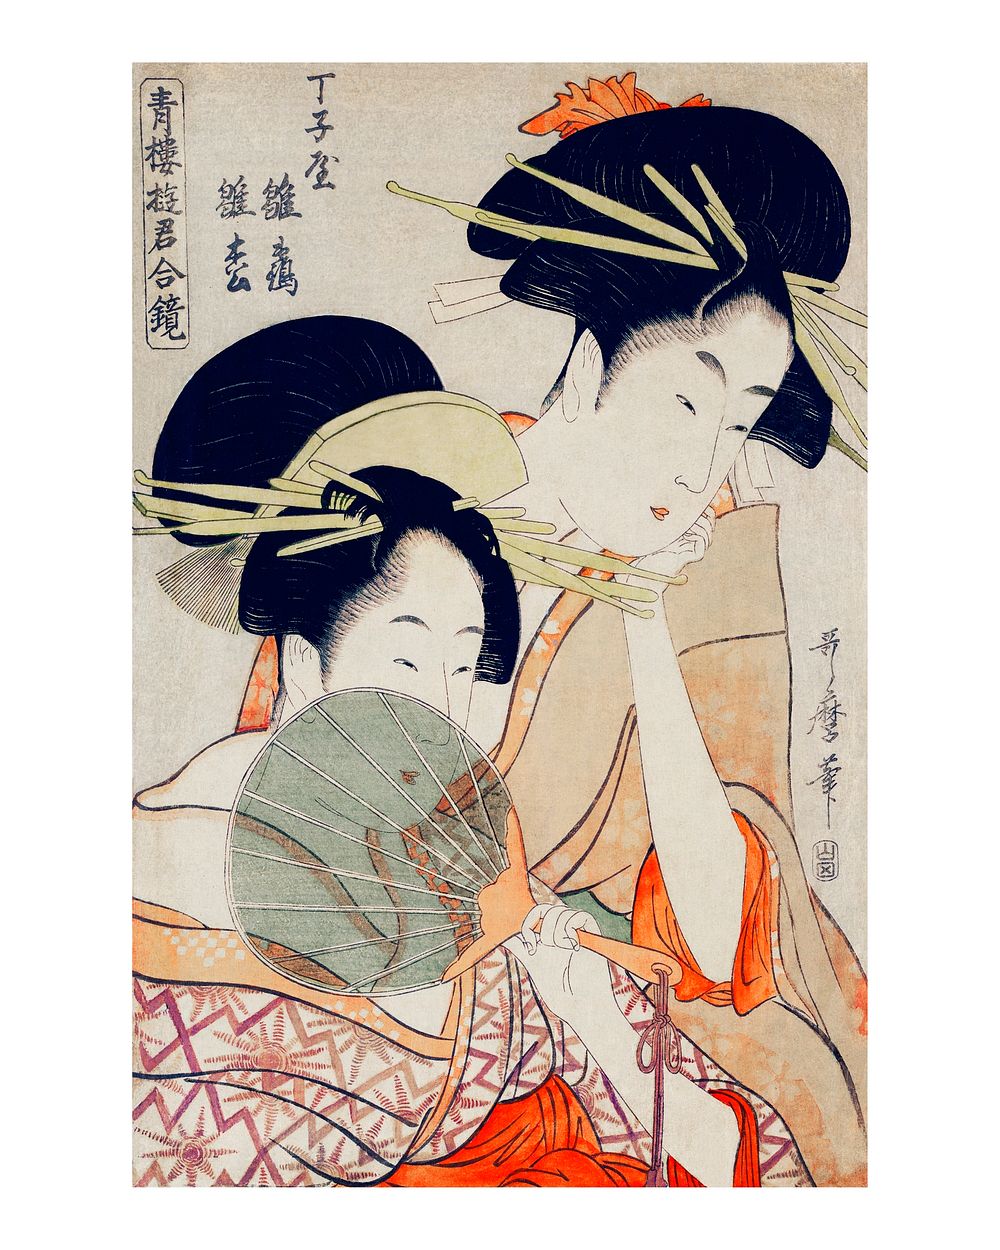 Traditional Japanese women courtesans holding a fan with elaborate hair ornaments vintage illustration wall art print and…